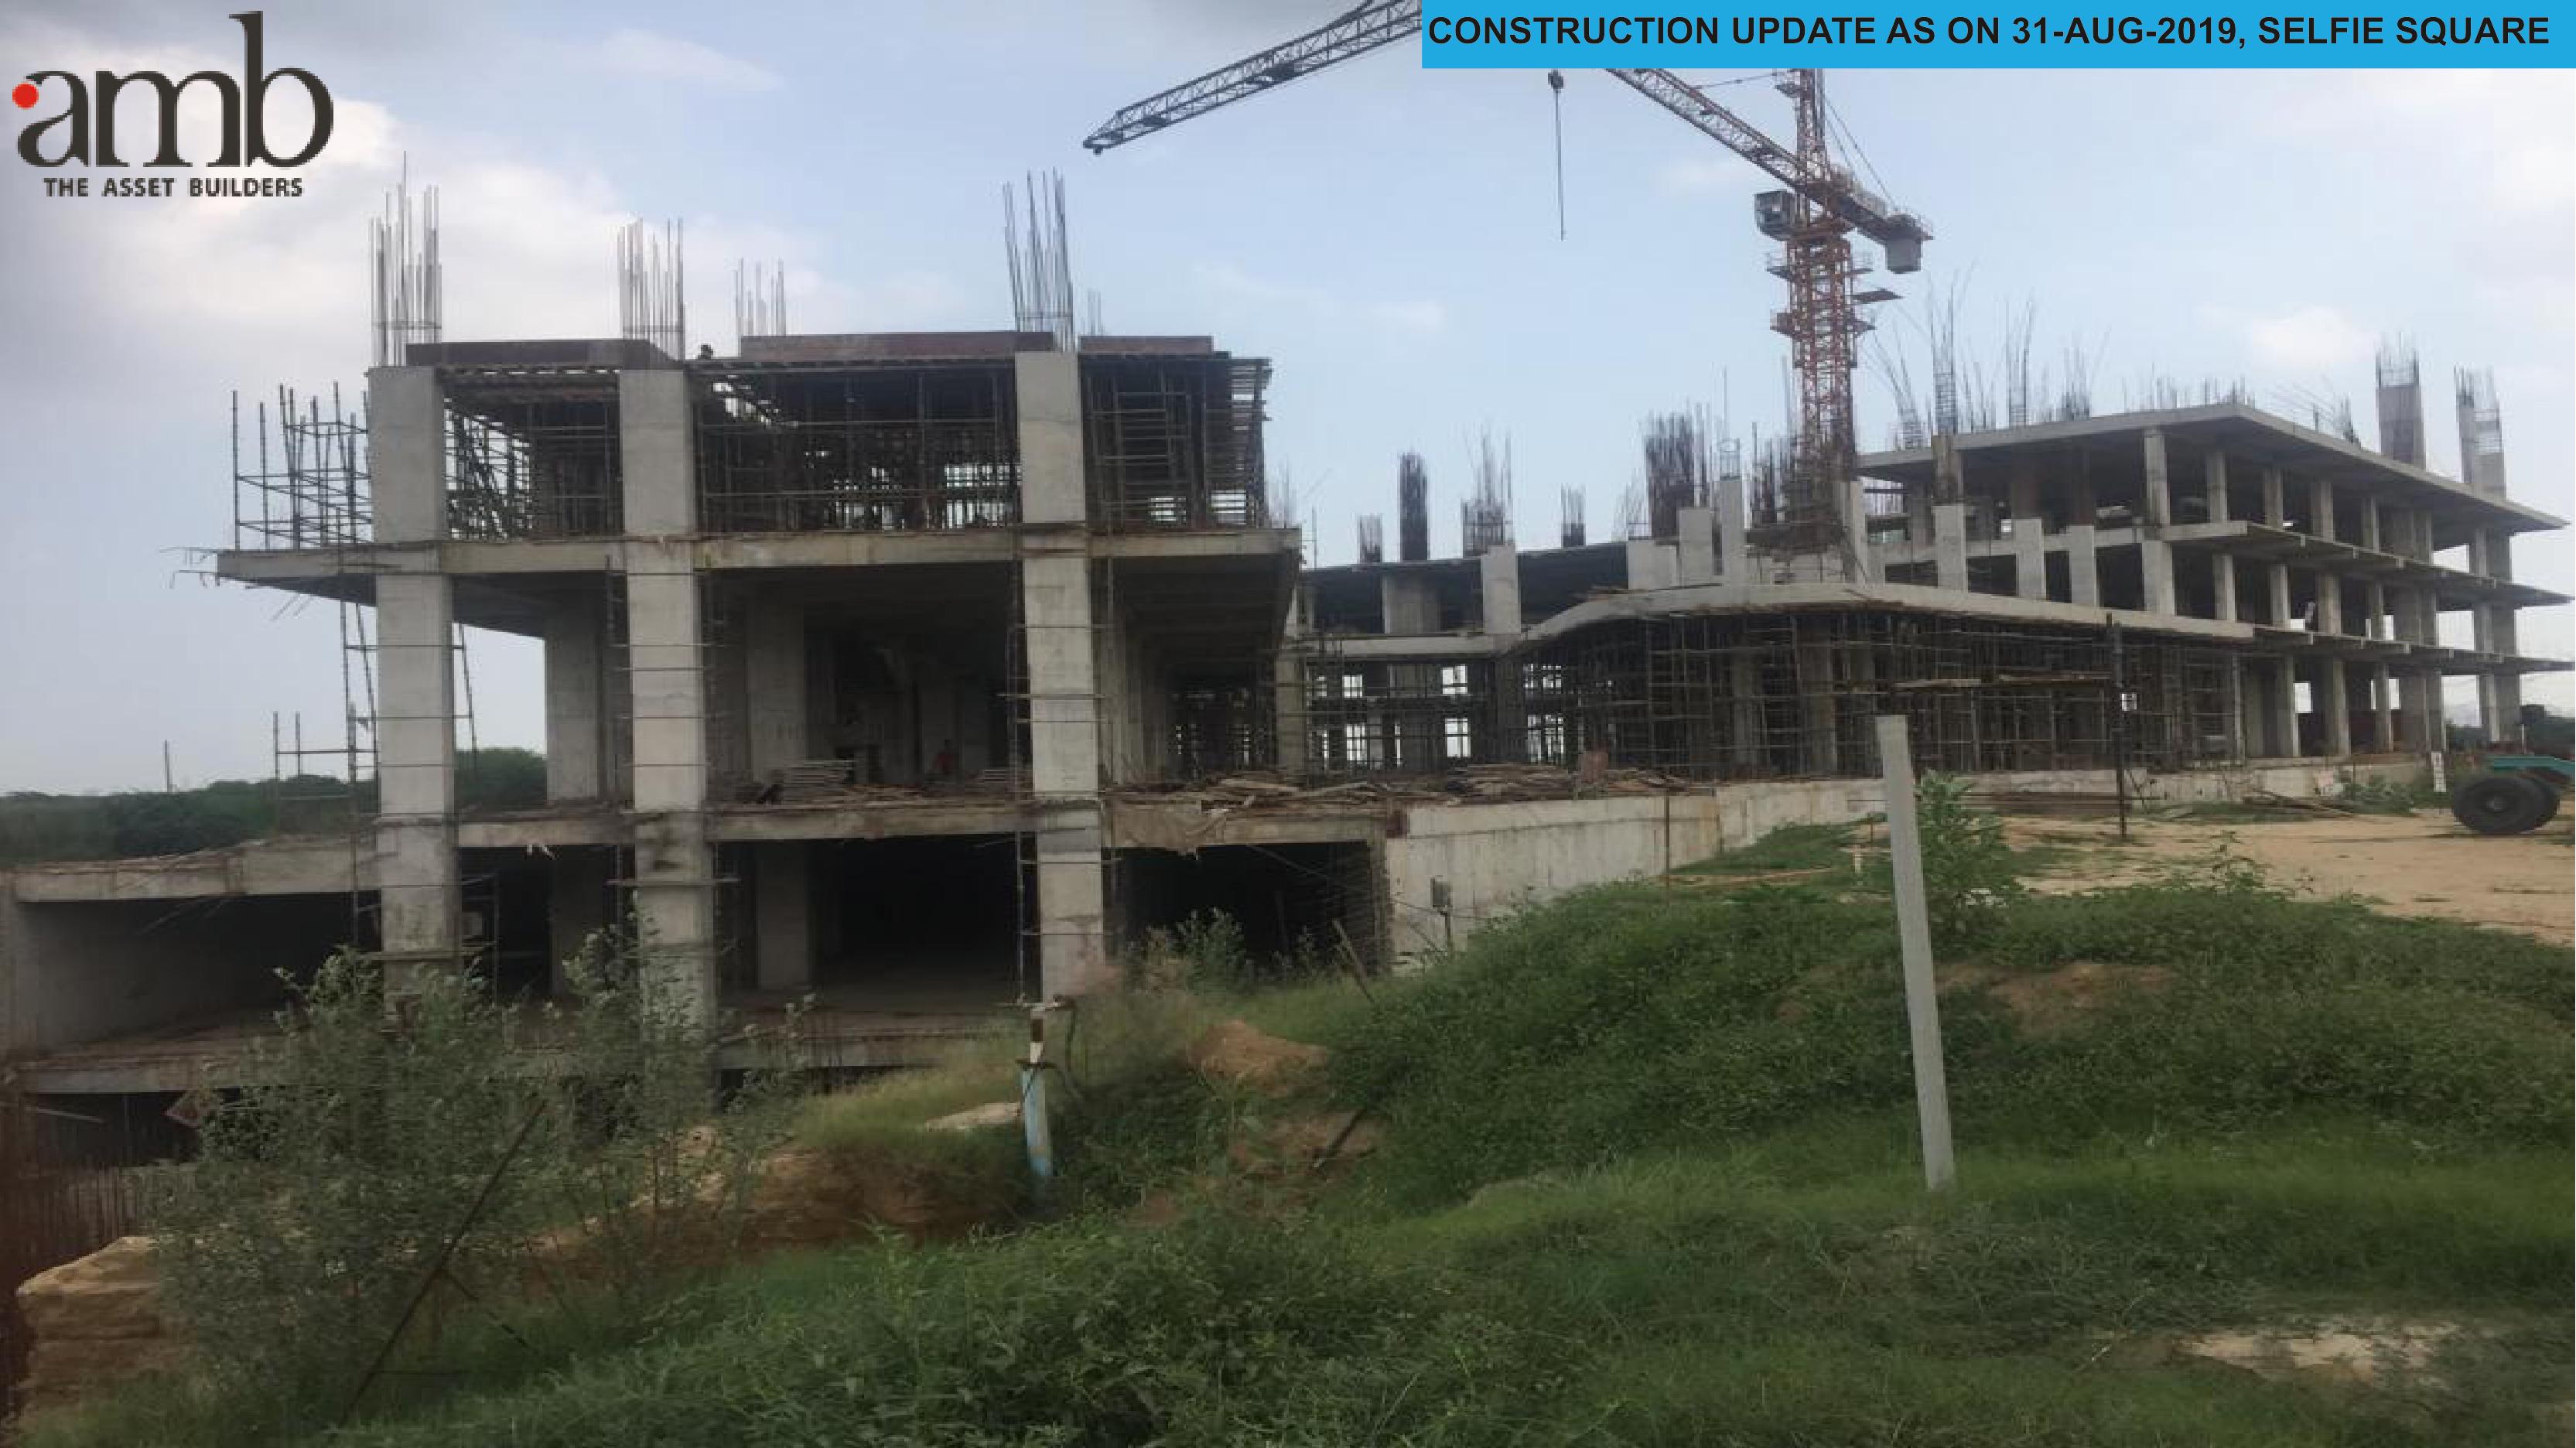 Construction updates of AMB Selfie Square as on Aug 2019 Update